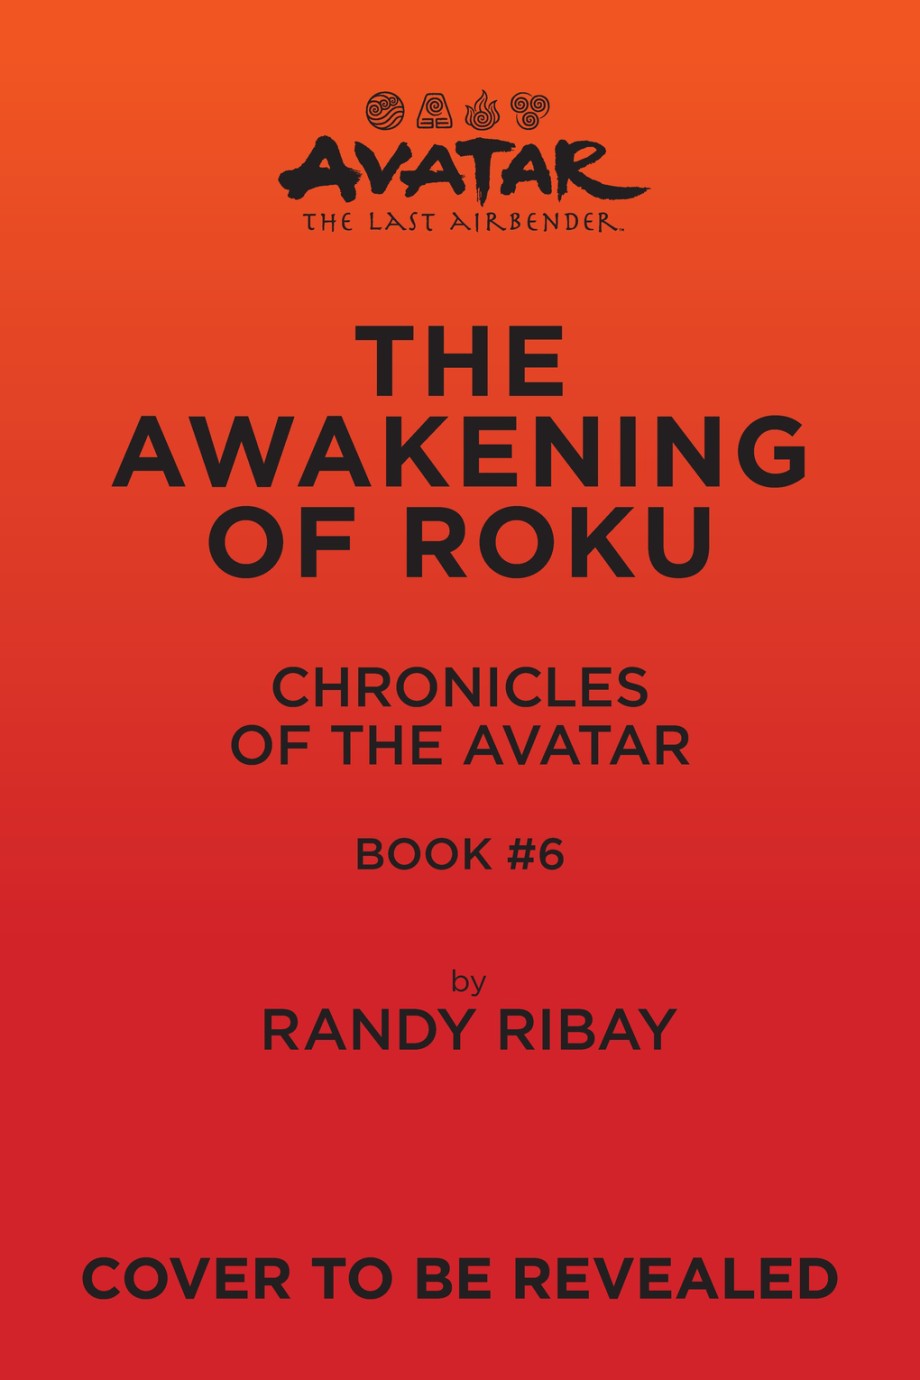 Avatar, The Last Airbender: The Awakening of Roku (Chronicles of the Avatar Book 6)